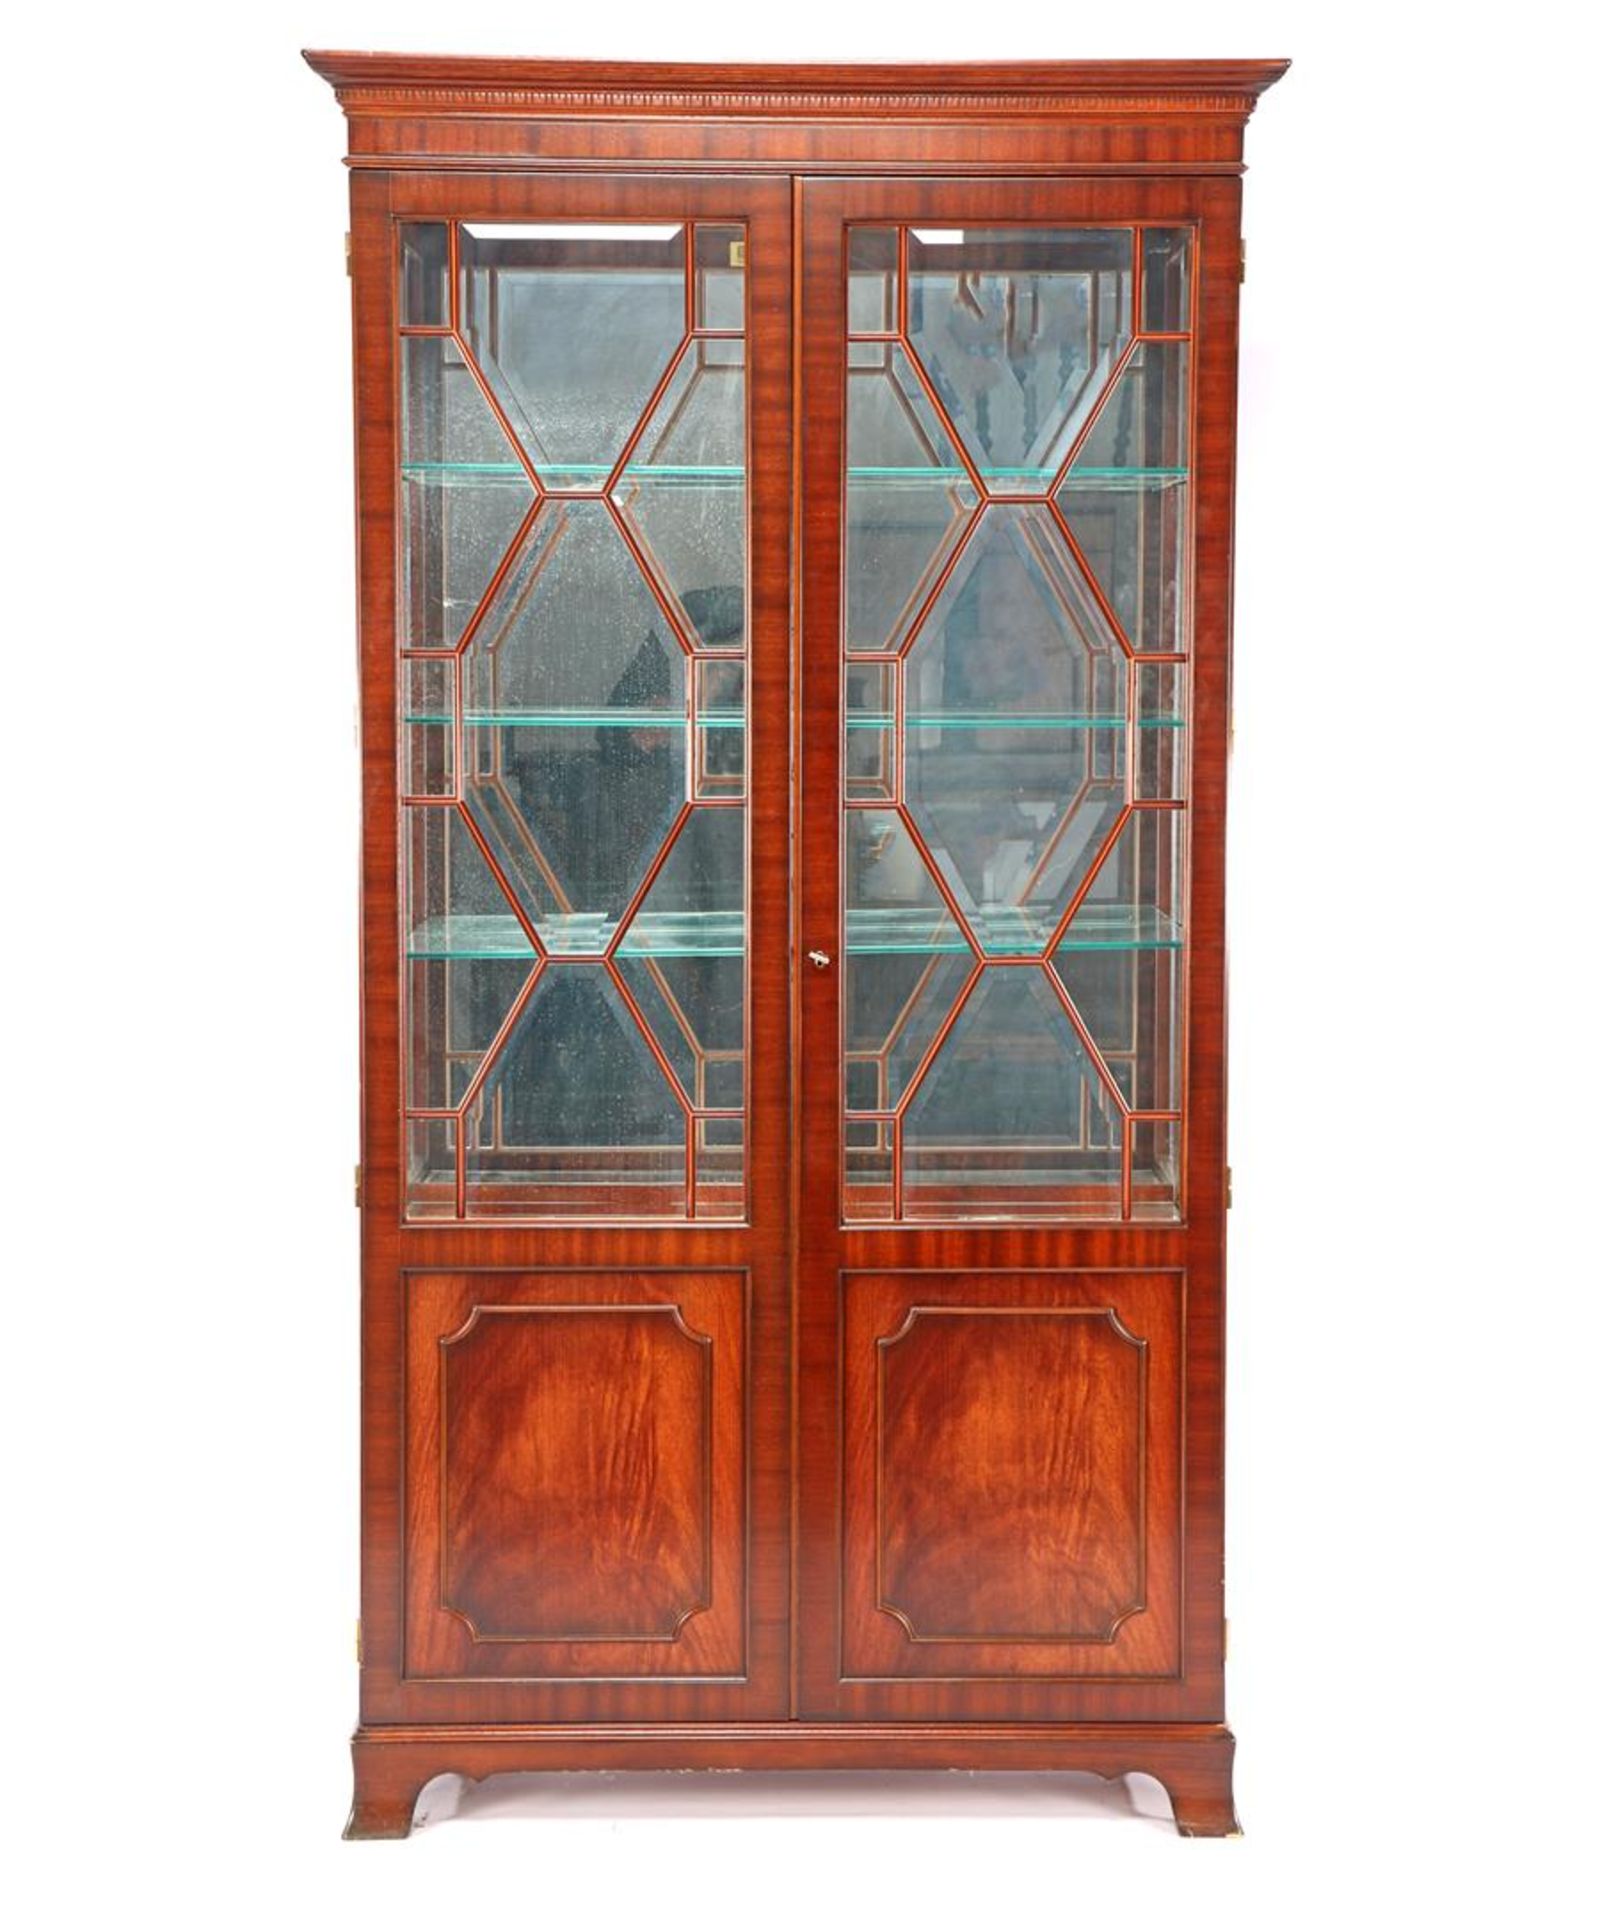 Heldense mahogany 2-door display cabinet with facet cut glass in doors and sides, mirror rear